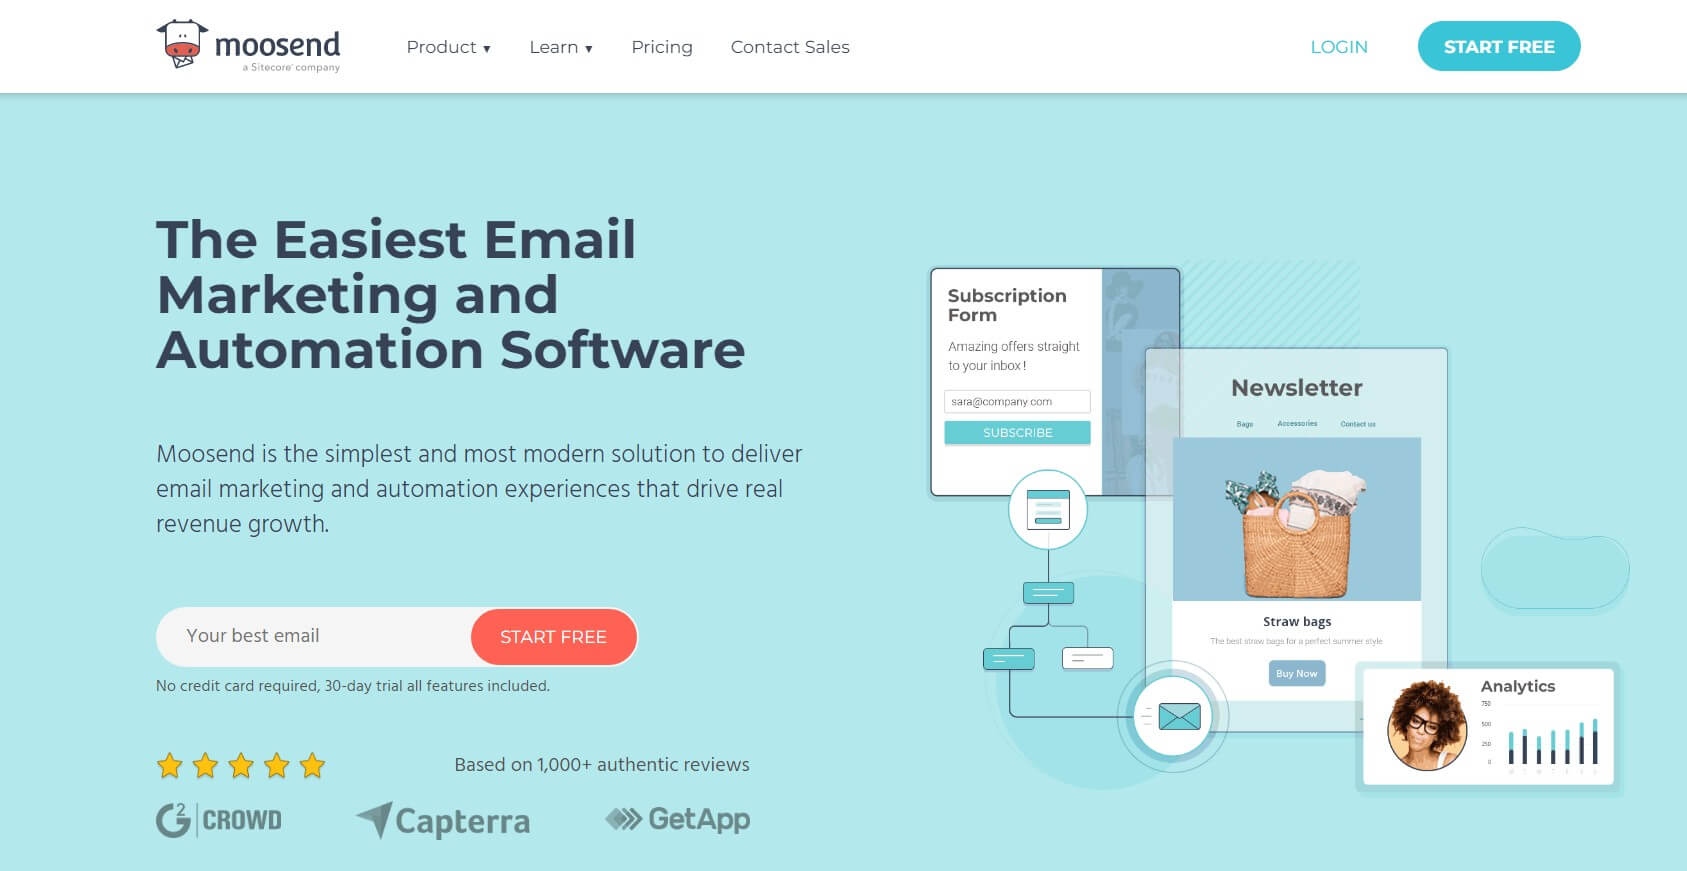 Home page of the Moosend email service provider